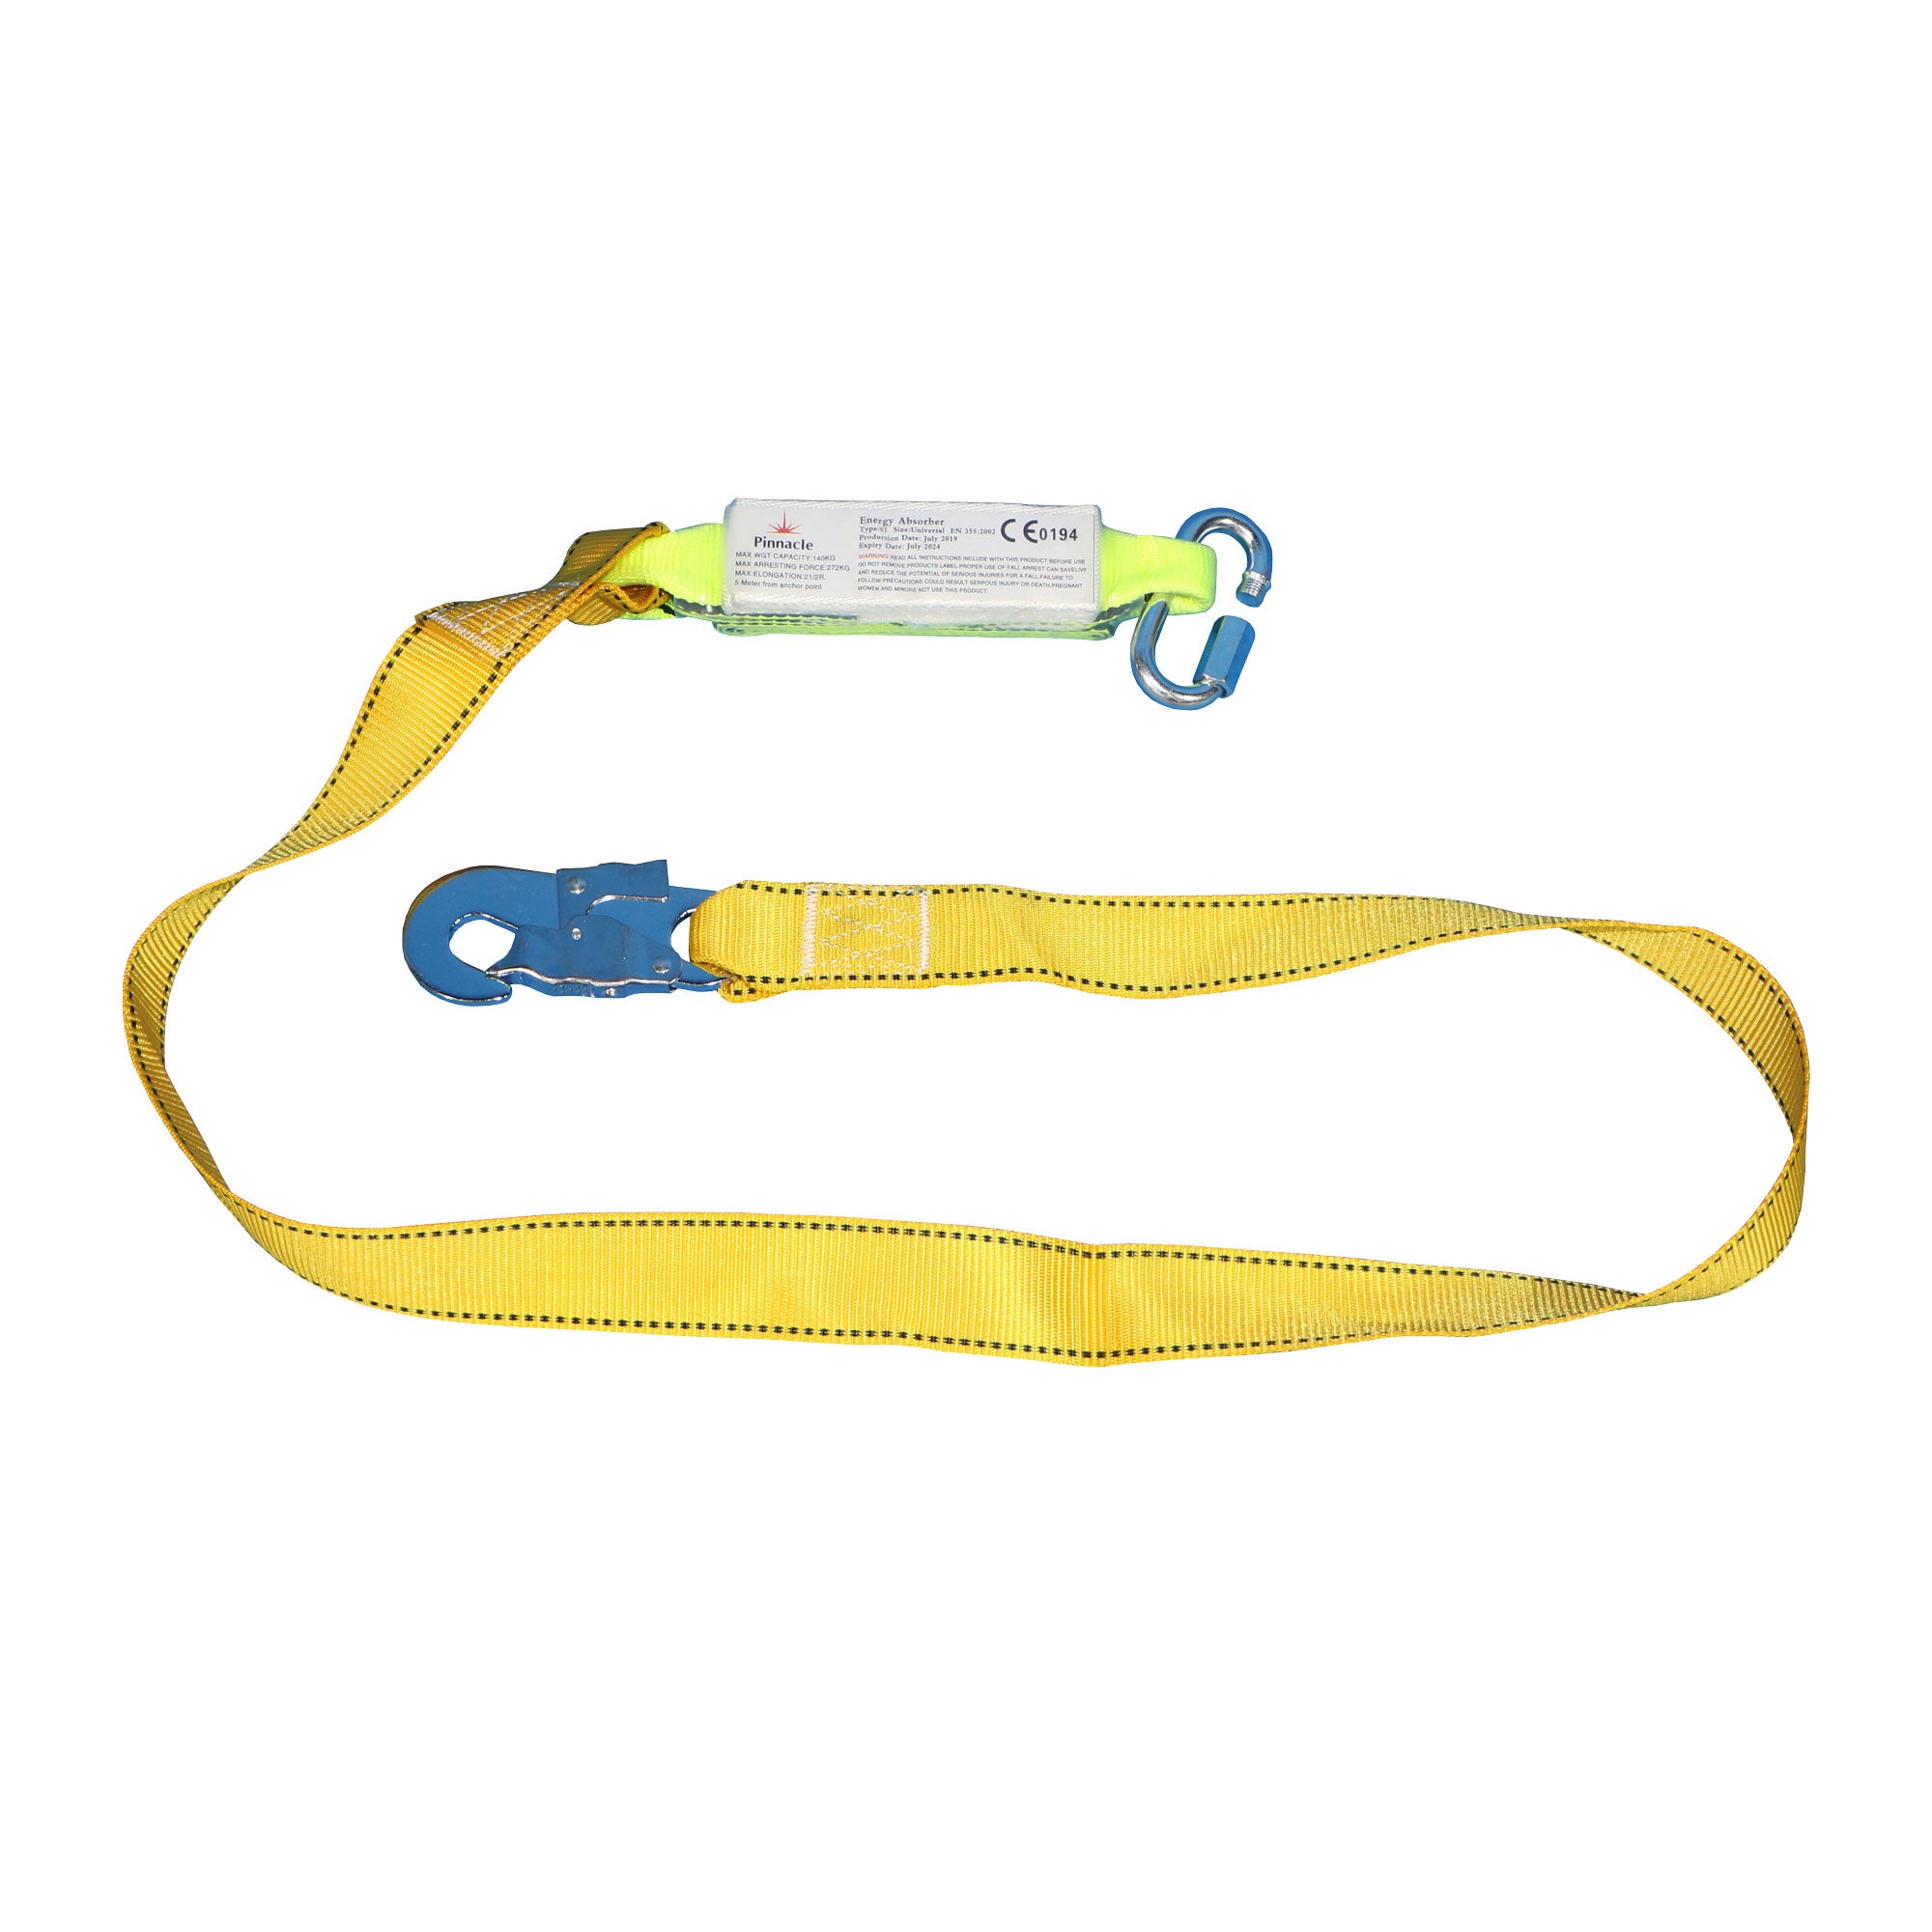 Single lanyard with Shock Absorber & Snap Hook for Safety Harness